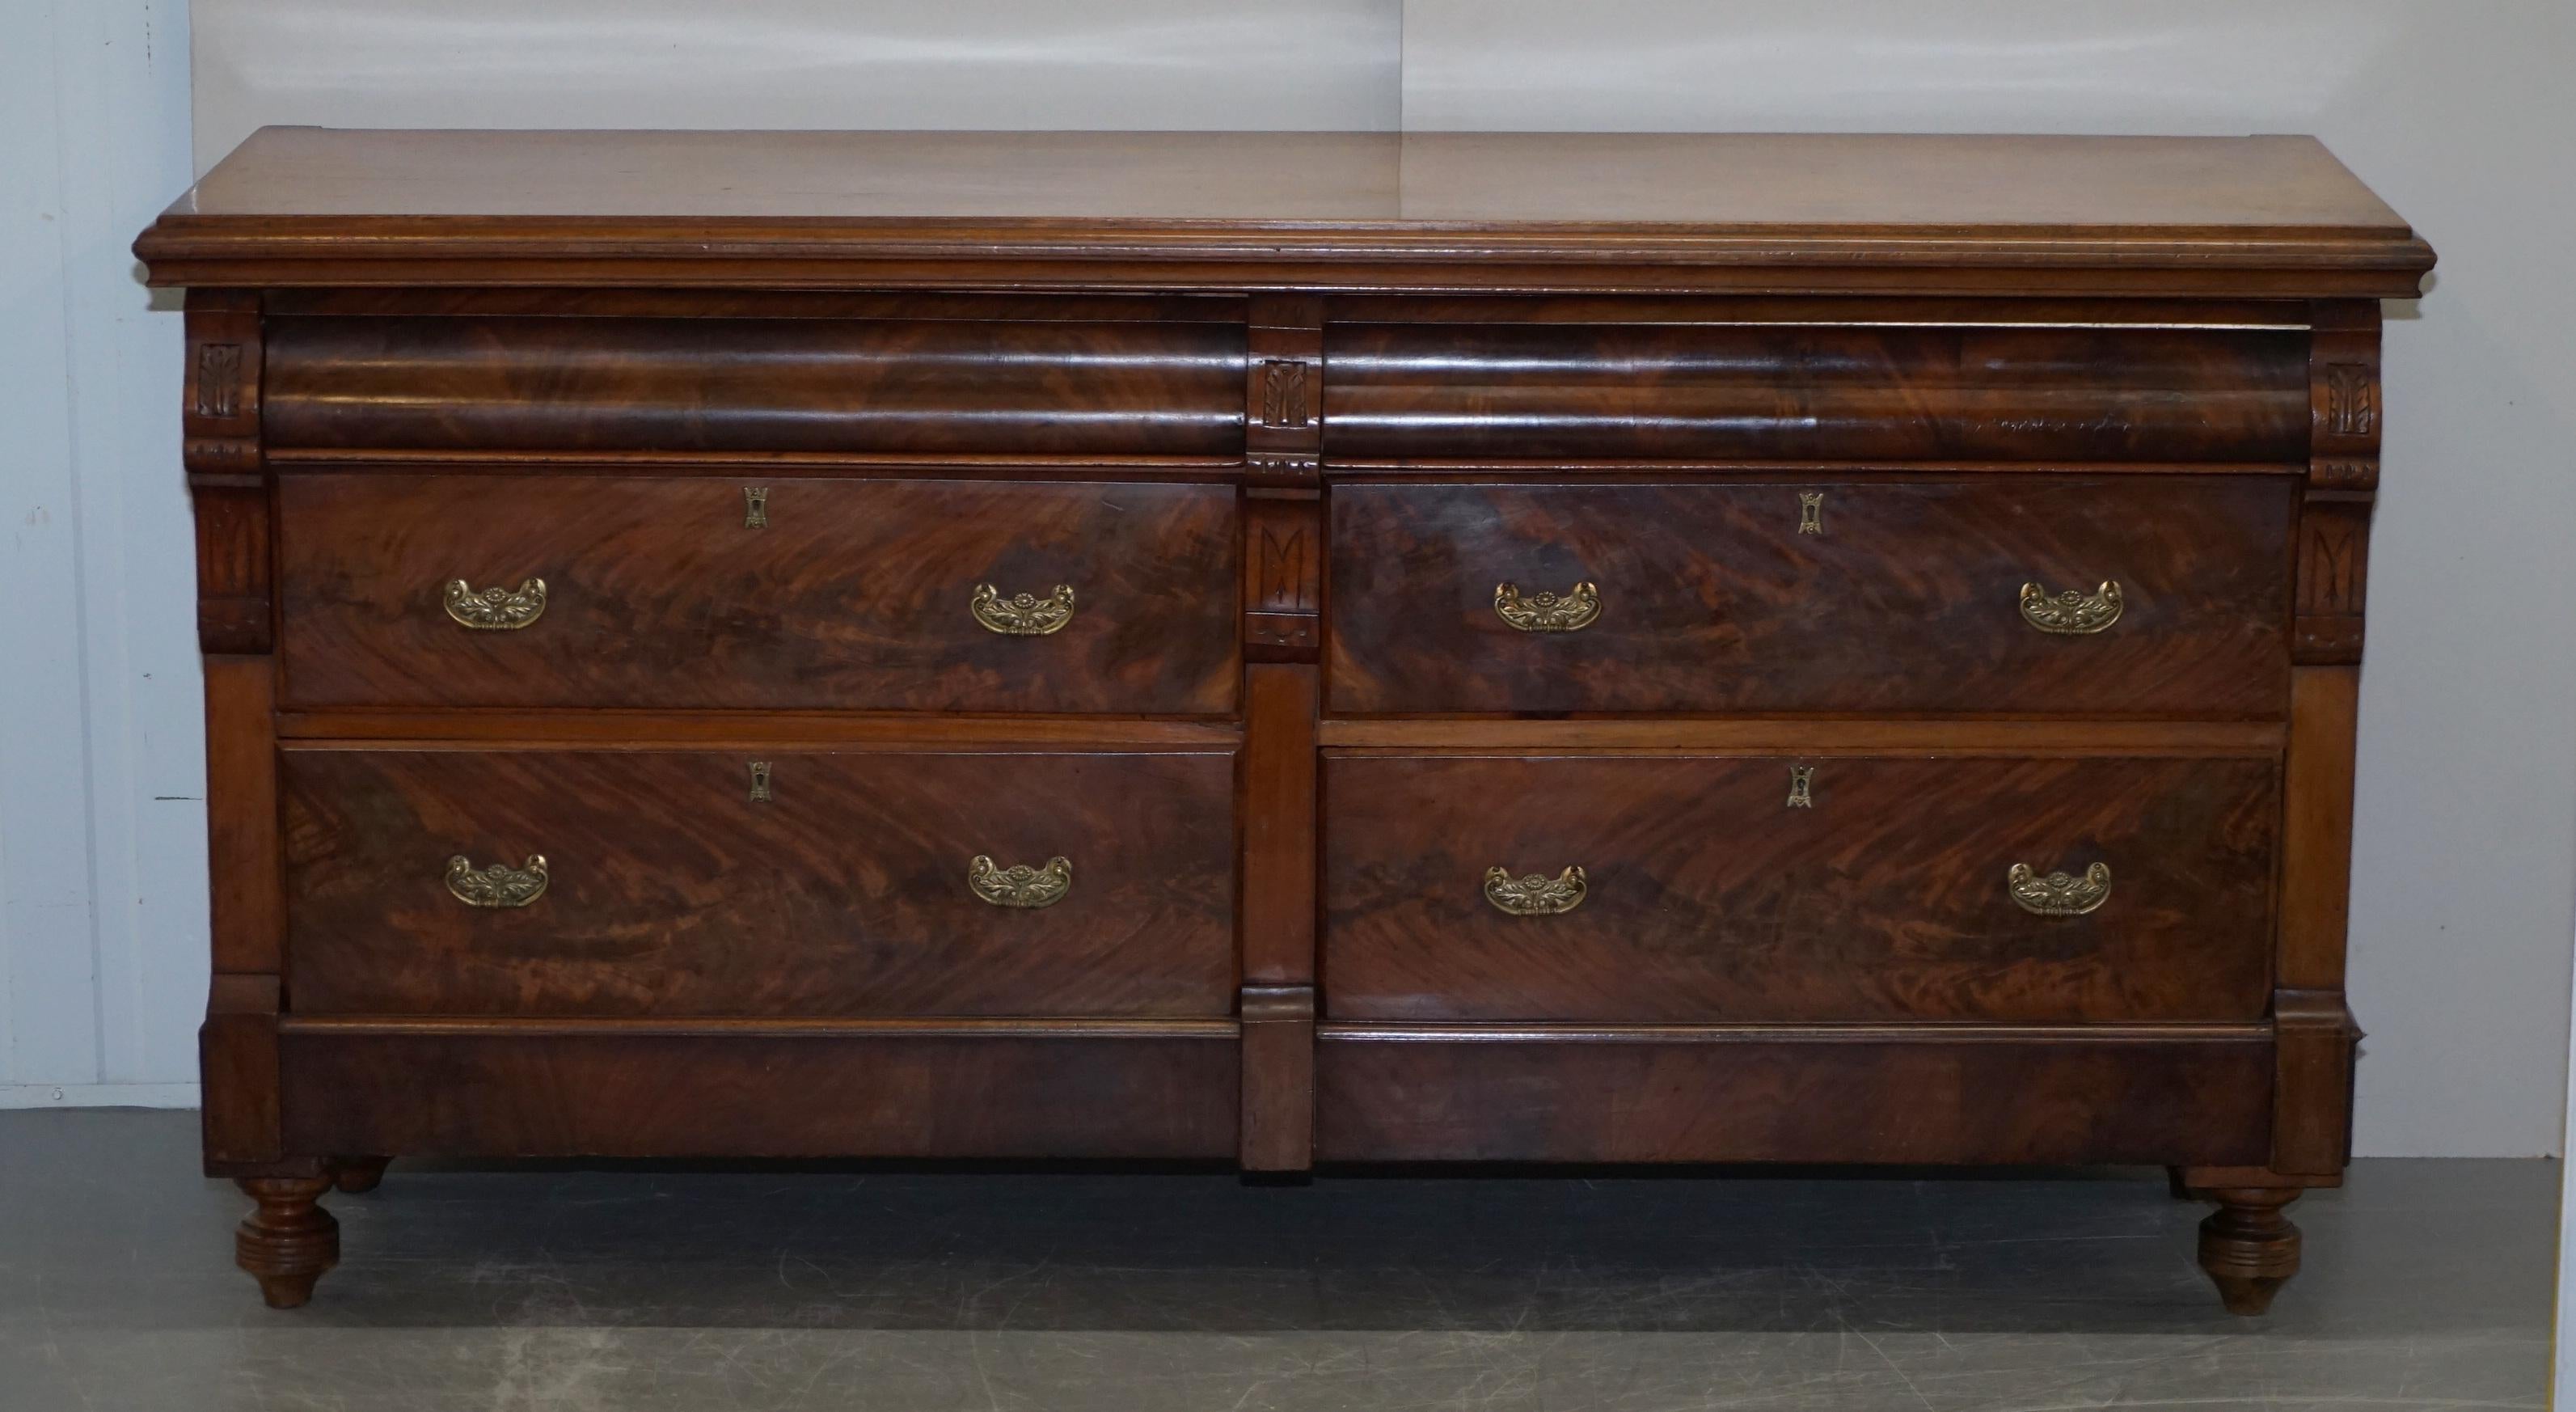 We are delighted to offer for sale this lovely mid Victorian circa 1860 Quarter cut and Burr Walnut sideboard with six large drawers

A very decorative and extremely well made piece, the cuts of walnut simply glow in the right light, the top two